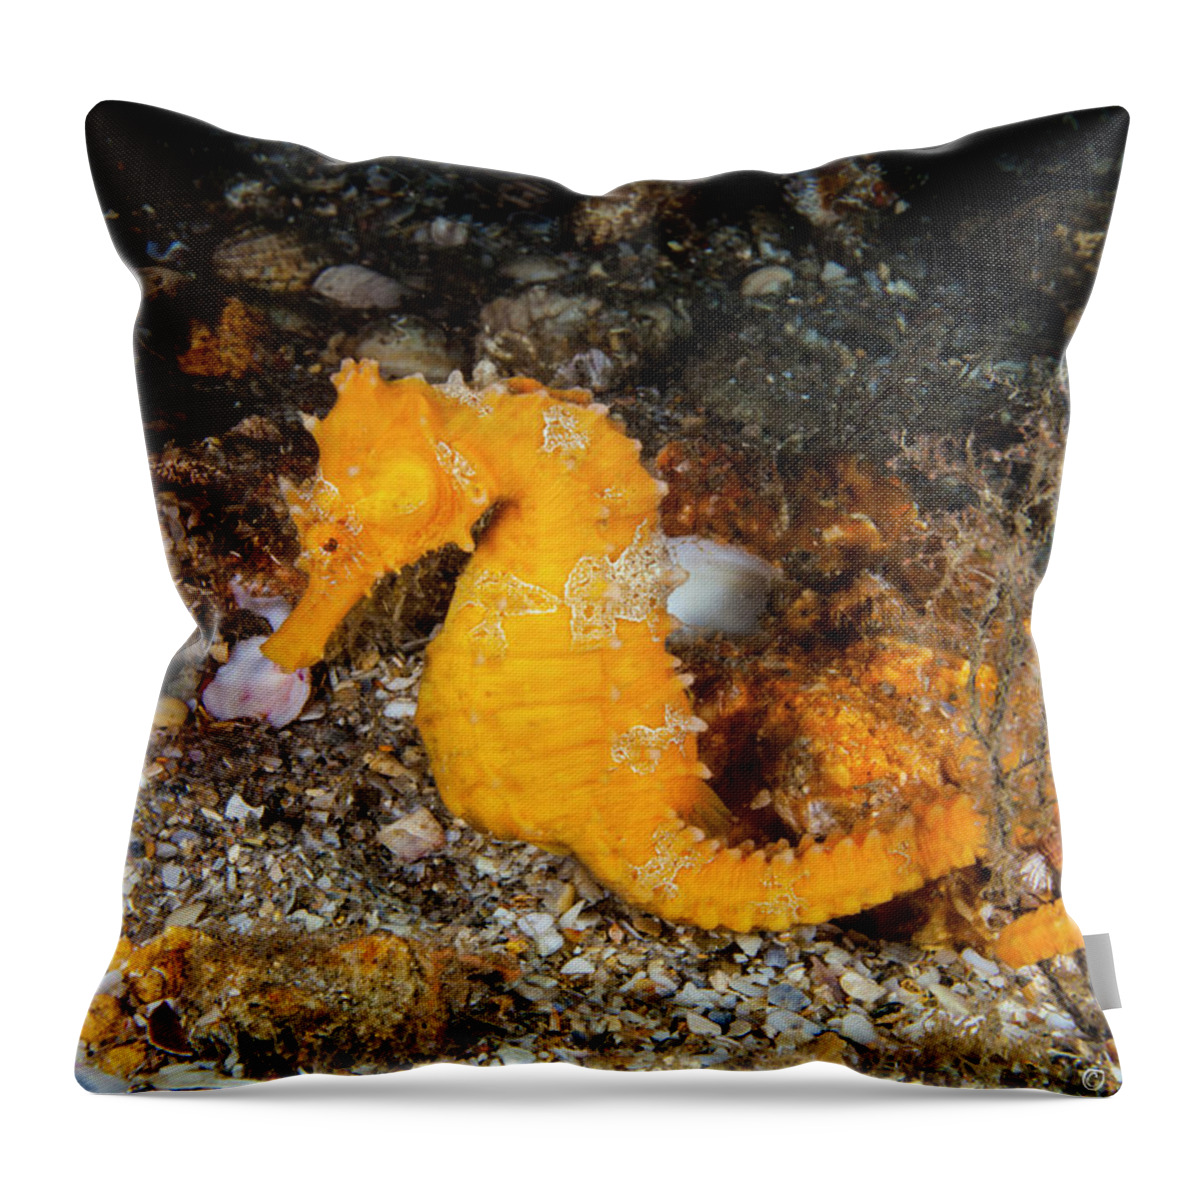 Seahorse Throw Pillow featuring the photograph Orange Jewel by Sandra Edwards